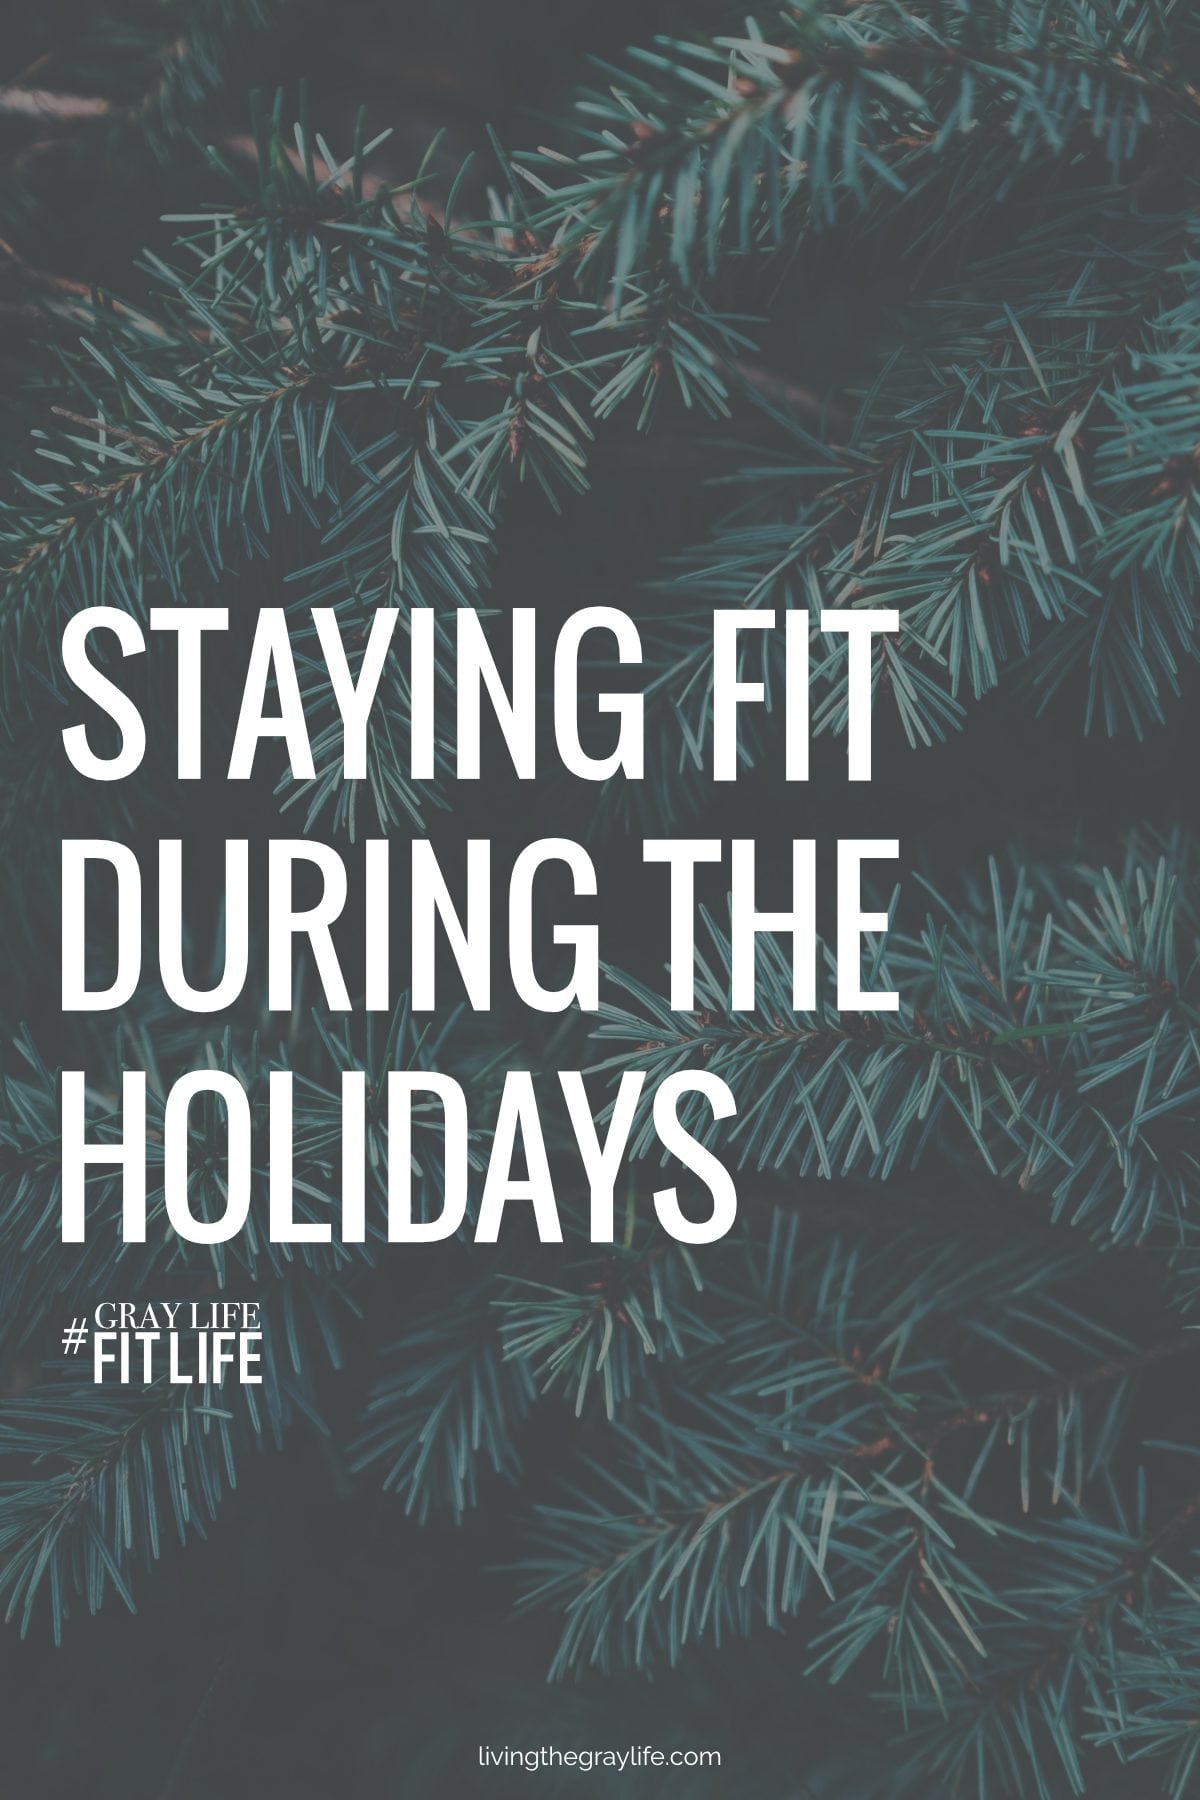 Staying Fit During the Holidays